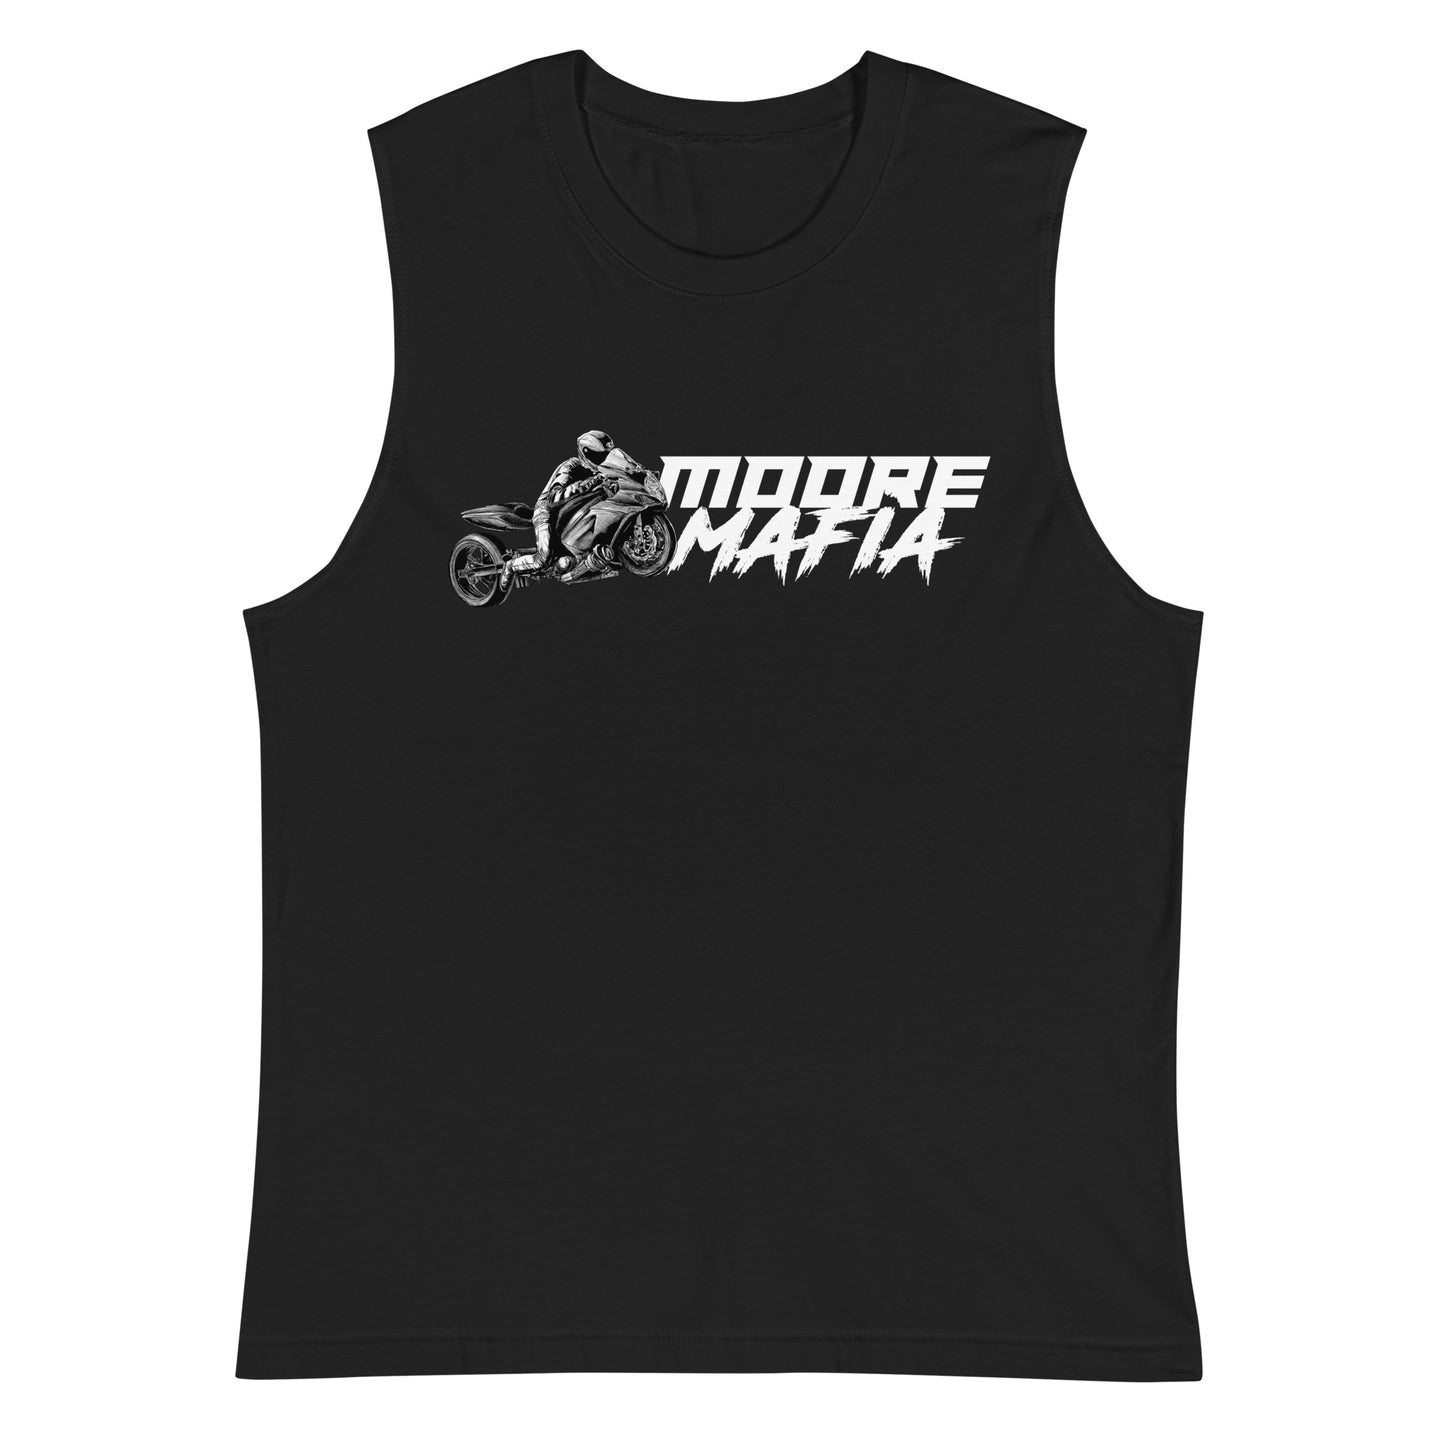 Repeat Muscle Shirt